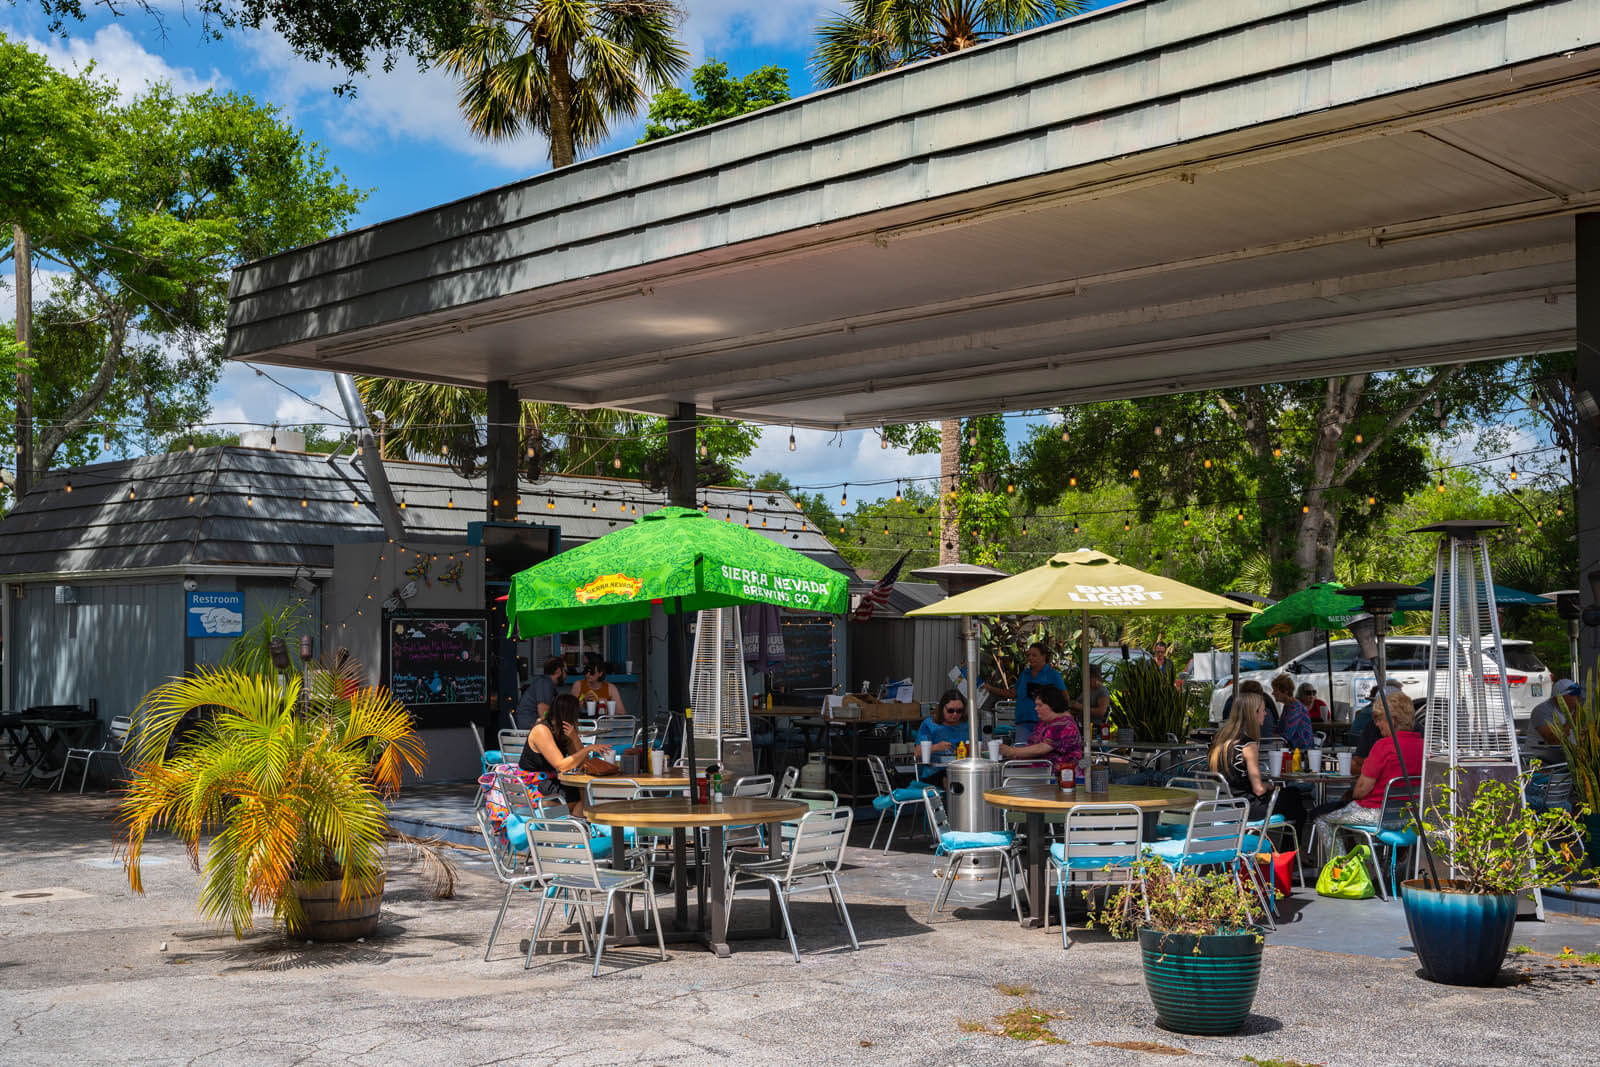 5th Avenue Streatery outdoor dining in Mount Dora Florida